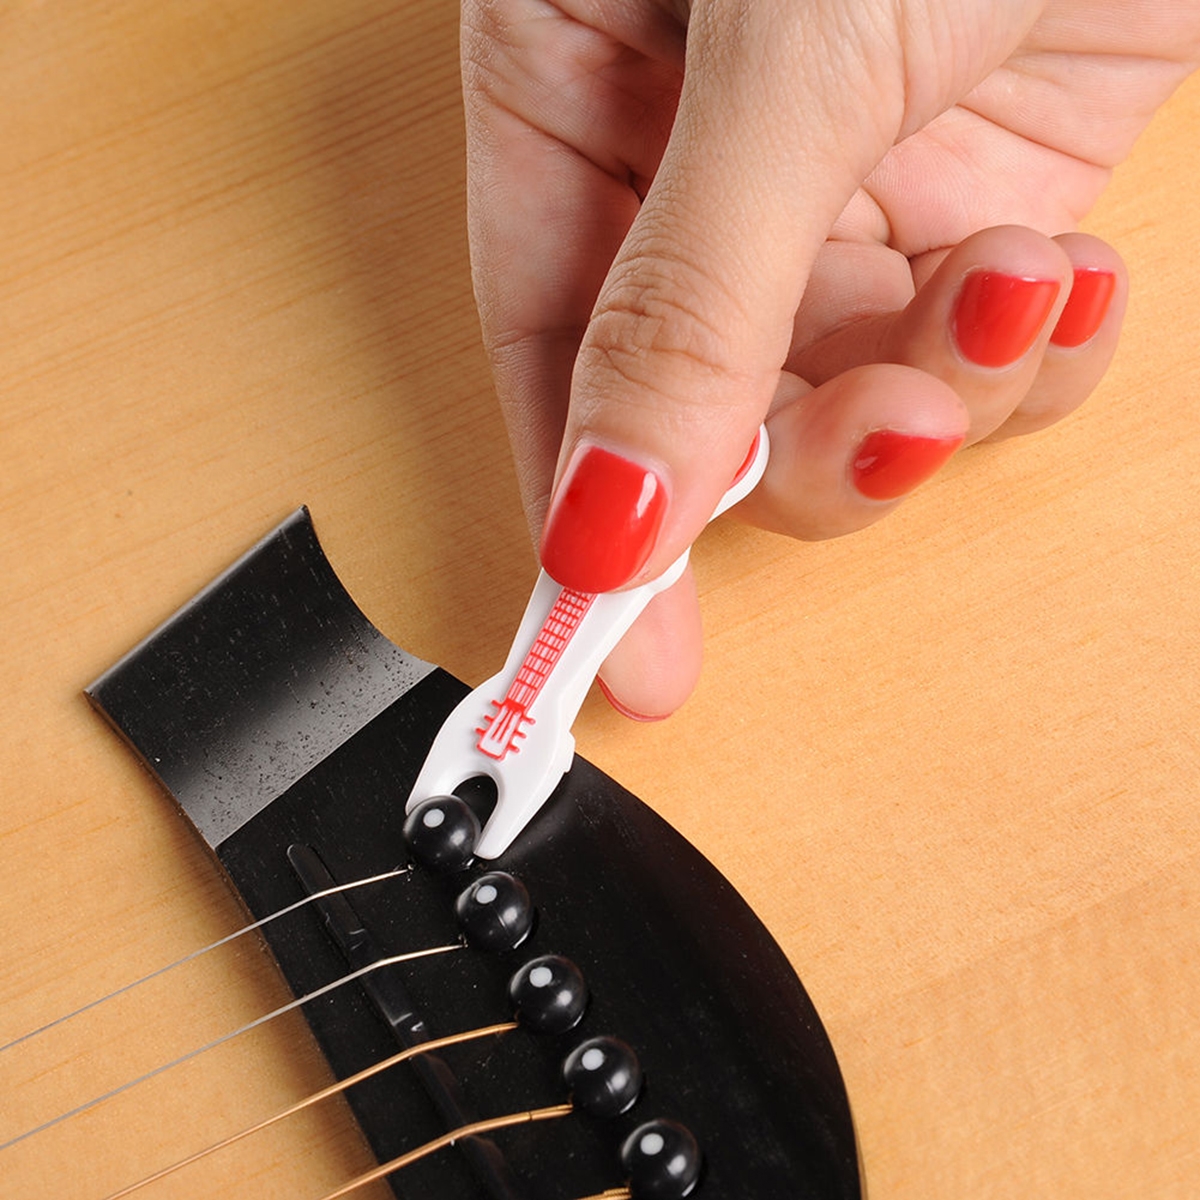 Guitar Chord Change Gadget Ukulele Folk Guitar From A Device Take String Nail Pull Stringed Cone Guitar Parts